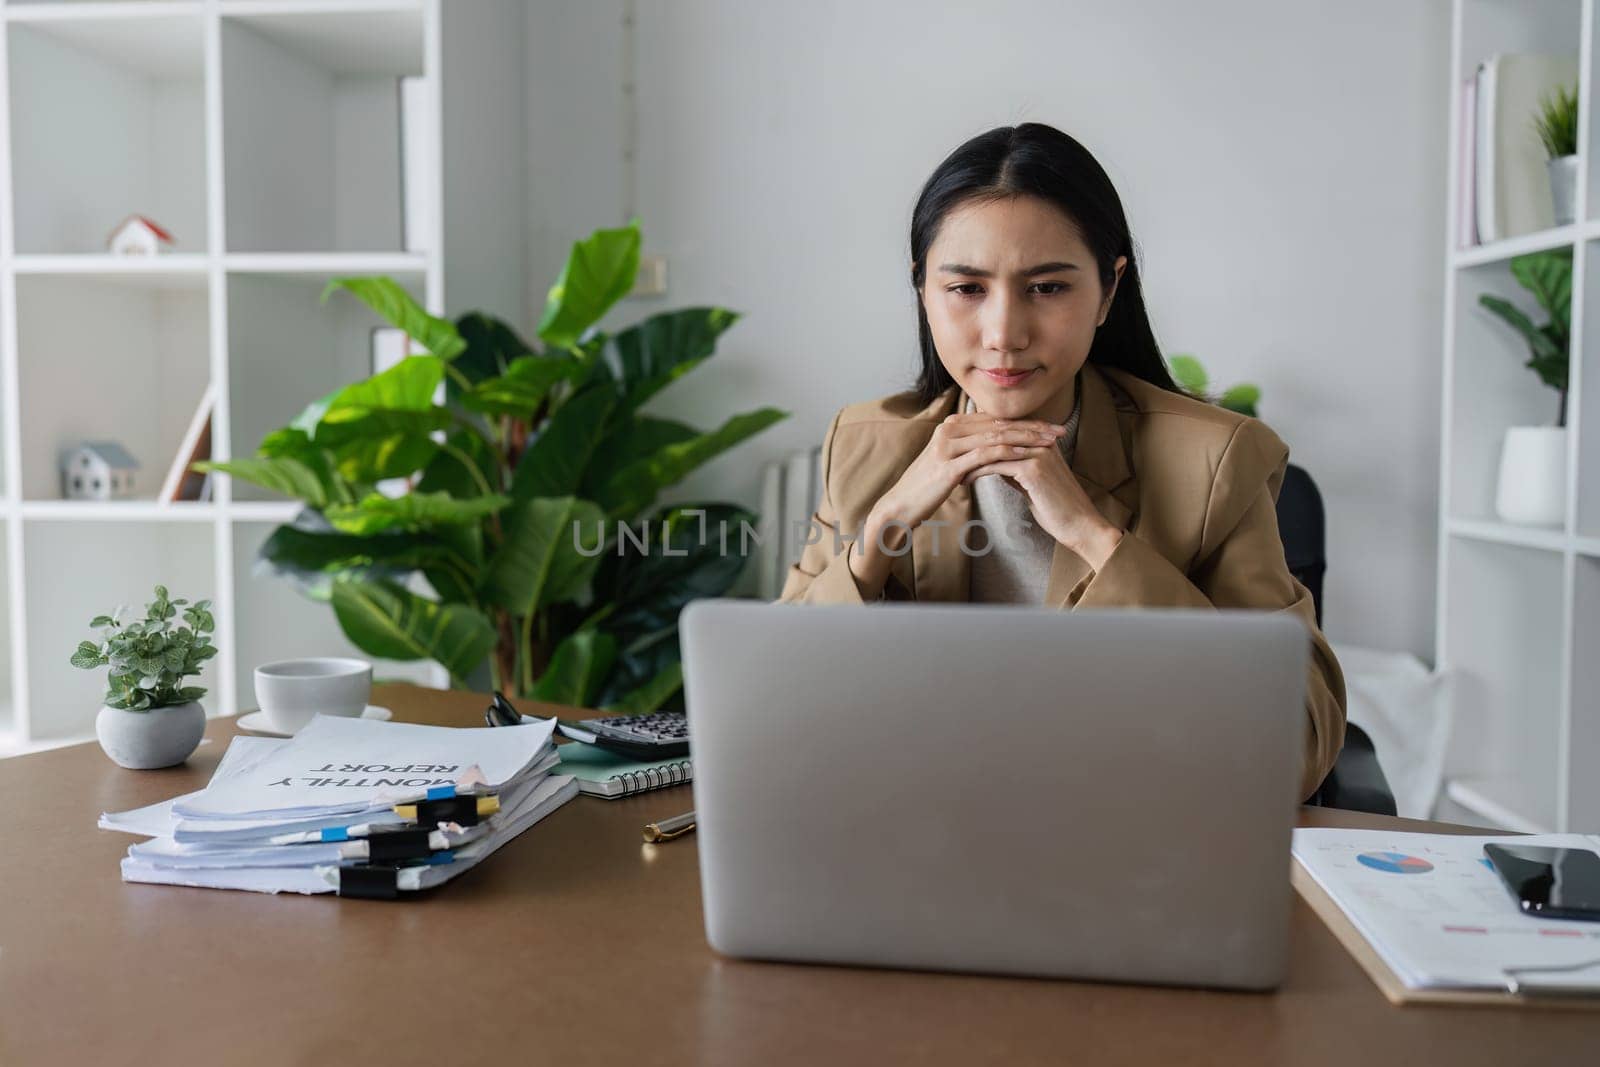 business woman entrepreneur in office using laptop at work, stress professional female company executive wearing suit working on computer at workplace.